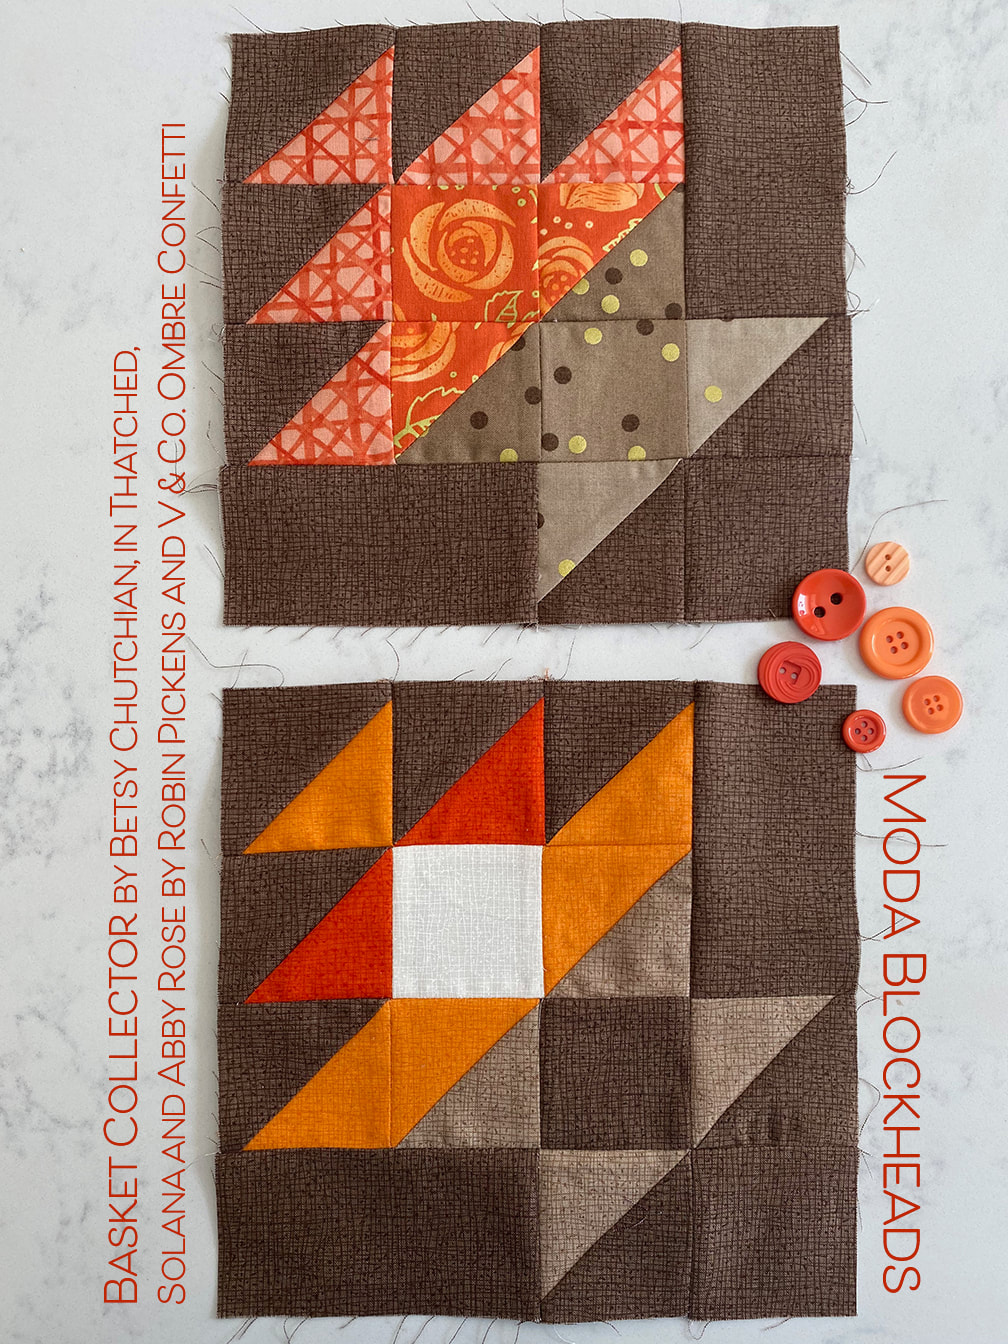 Basket Collector quilt block for Moda Blockheads from Betsy Chutchian done in Robin Pickens fabrics